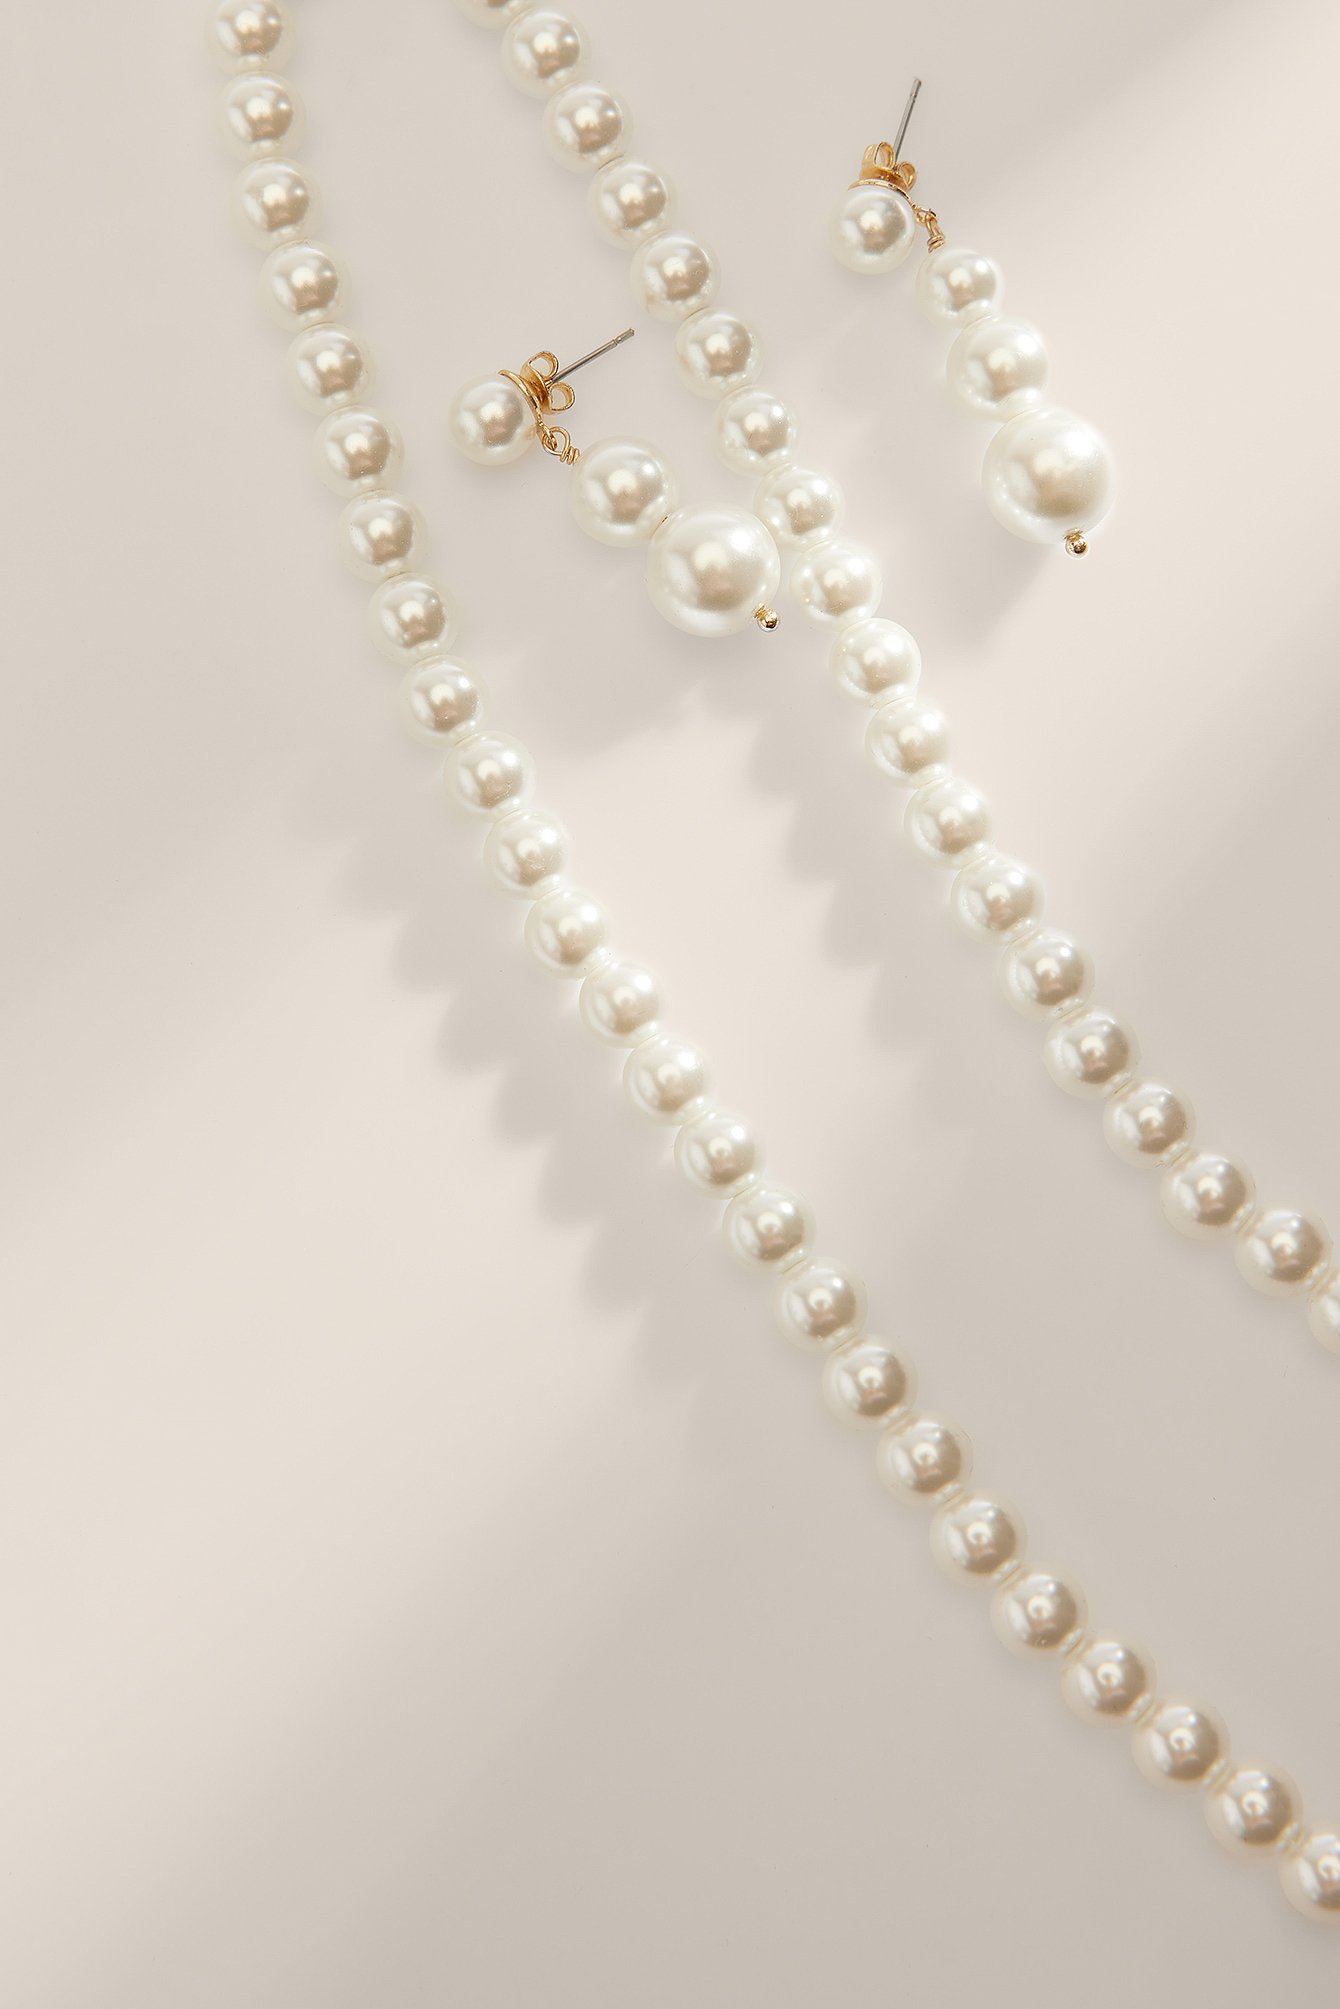 White Colored Pearl Necklace